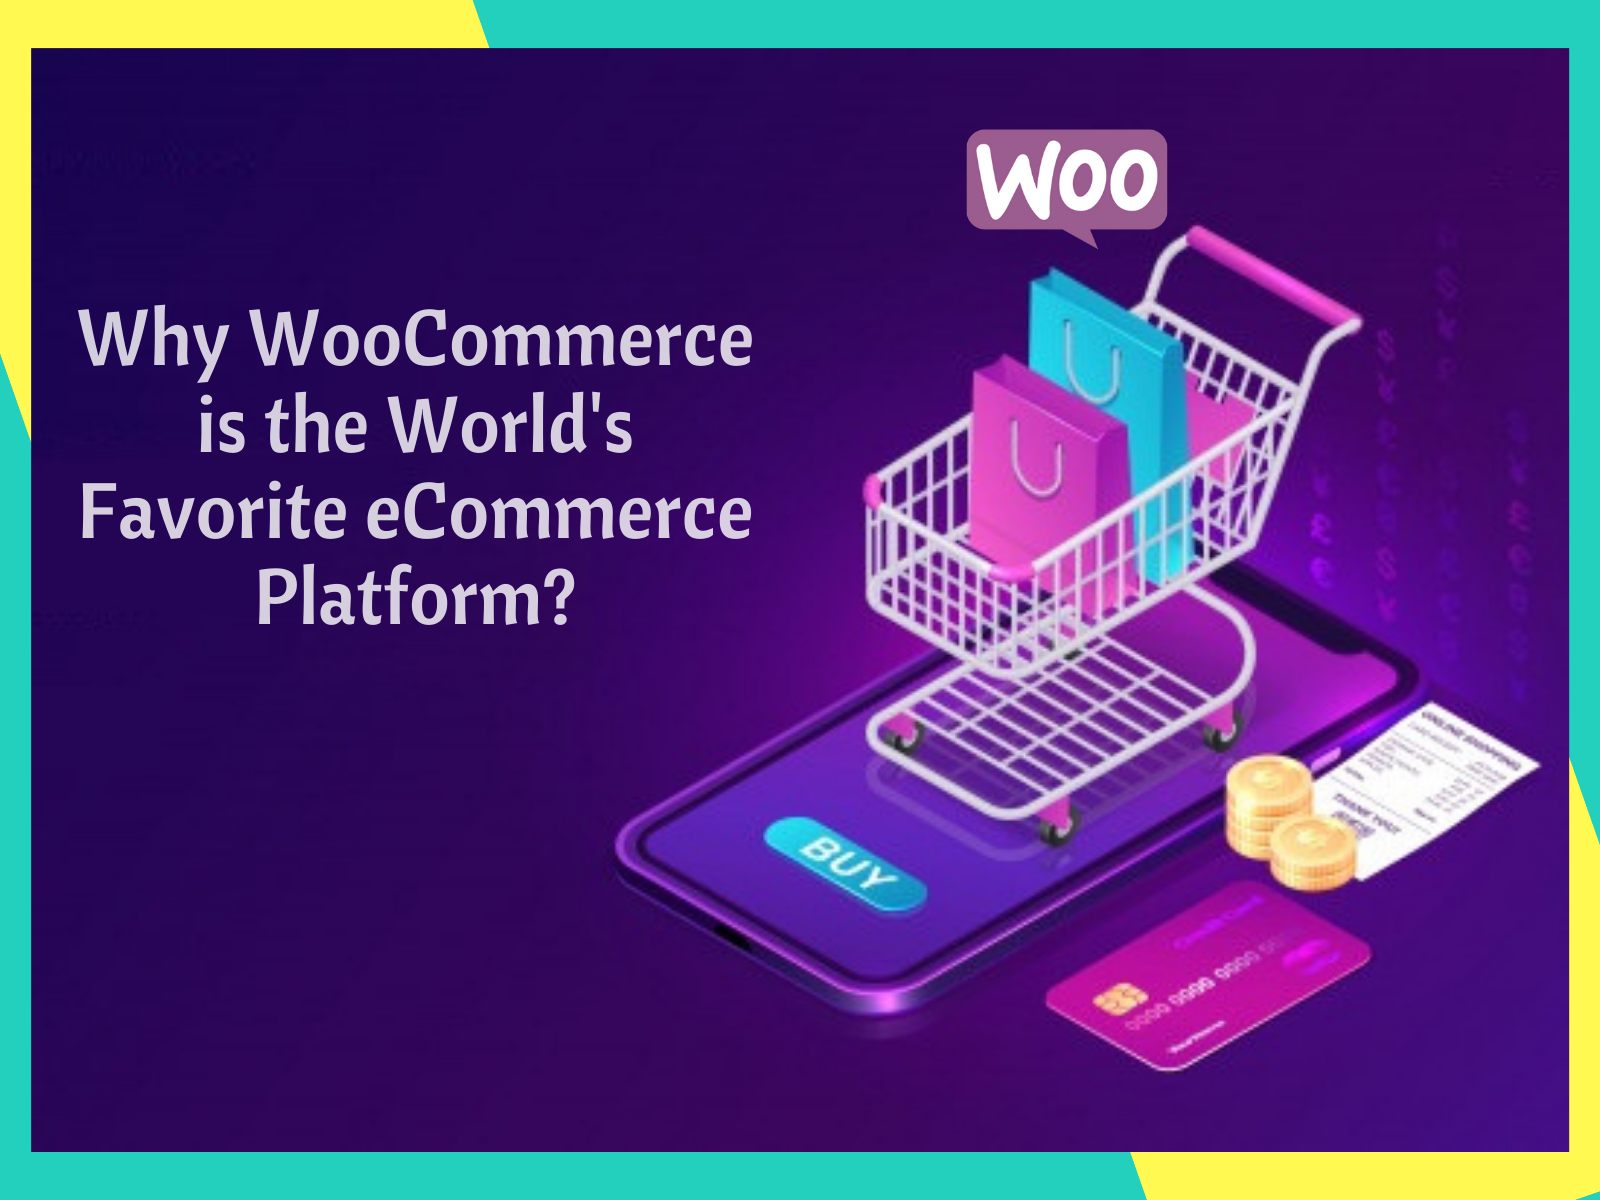 why-woocommerce-is-the-world-s-favorite-ecommerce-platform-by